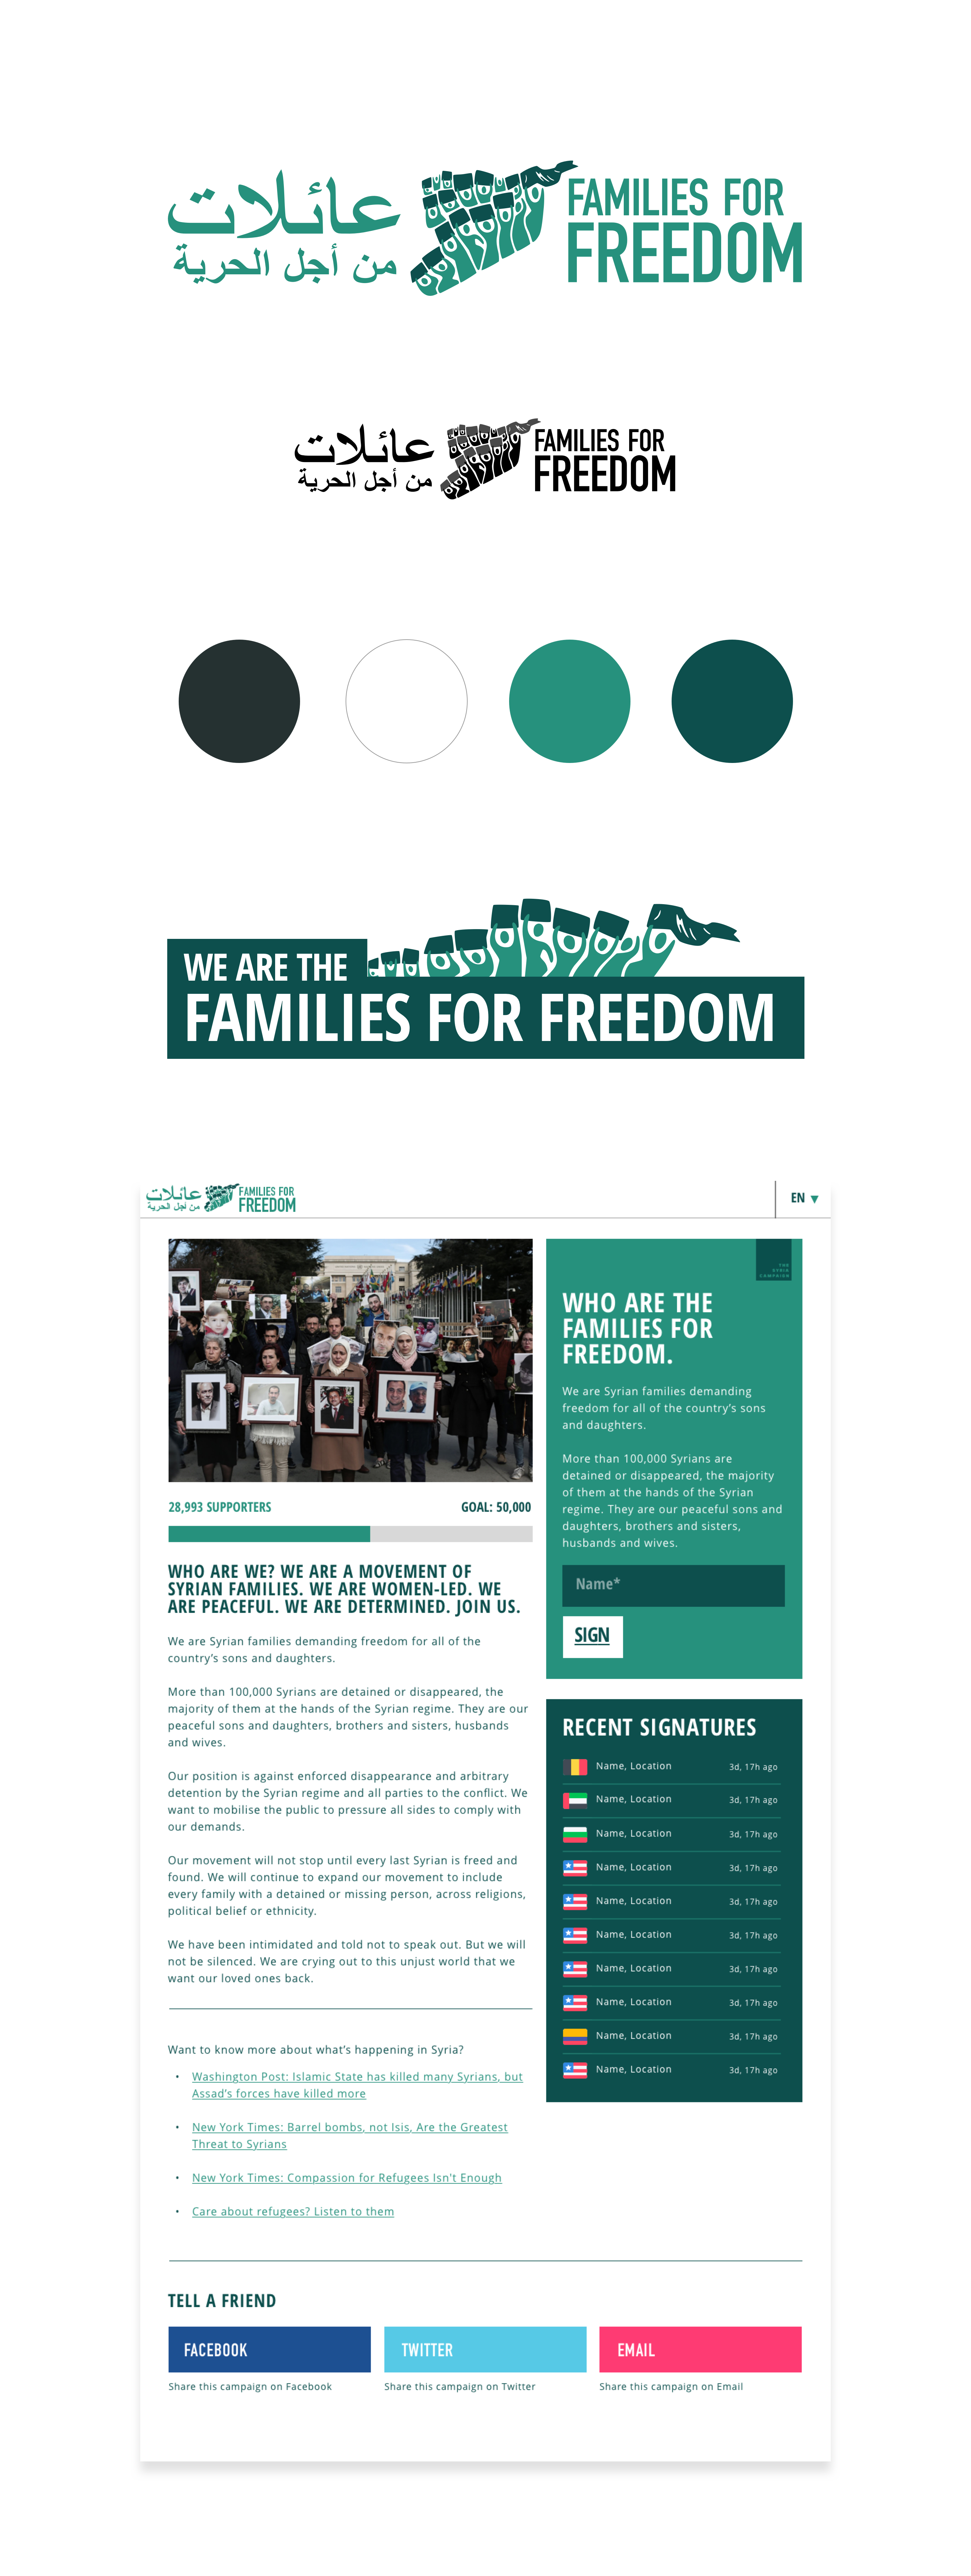 Families for freedom